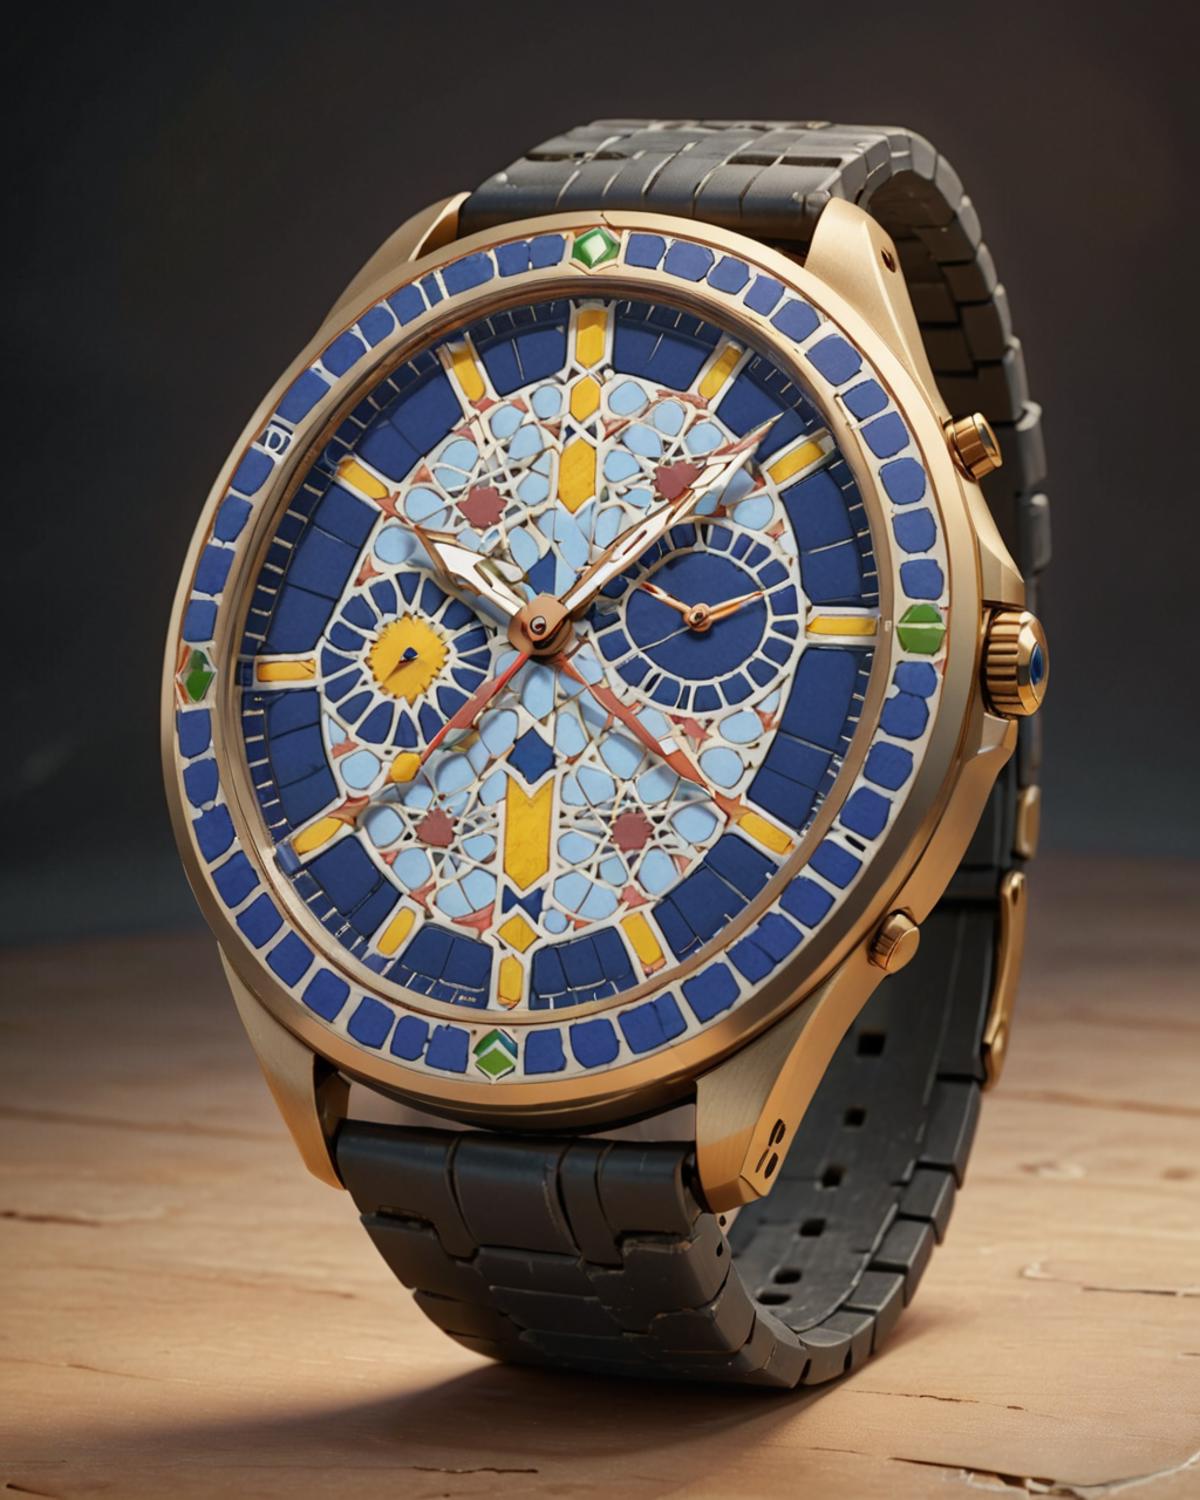 A Blue and Gold Watch with Gold Trim and Black Band.